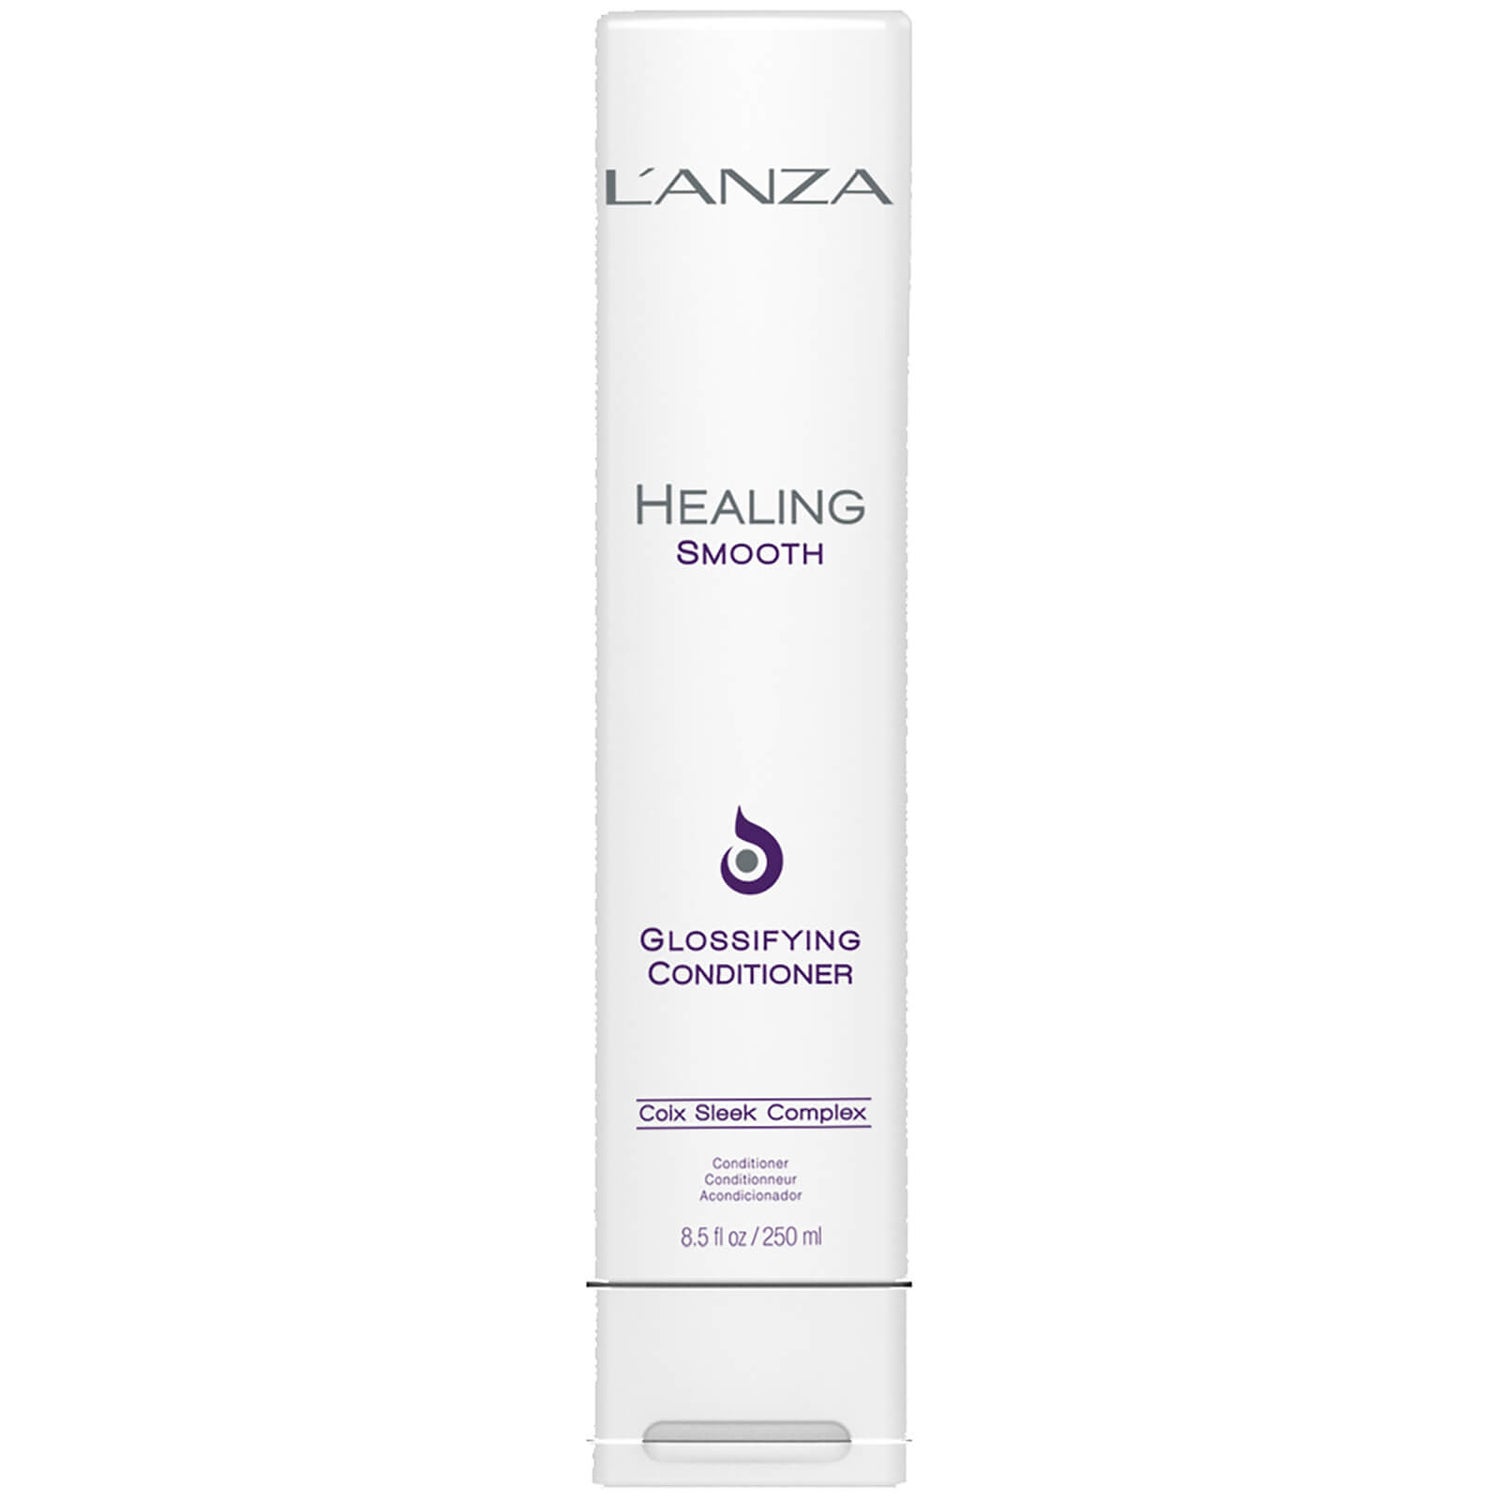 L'Anza Healing Smooth Glossifying Conditioner (250 ml)